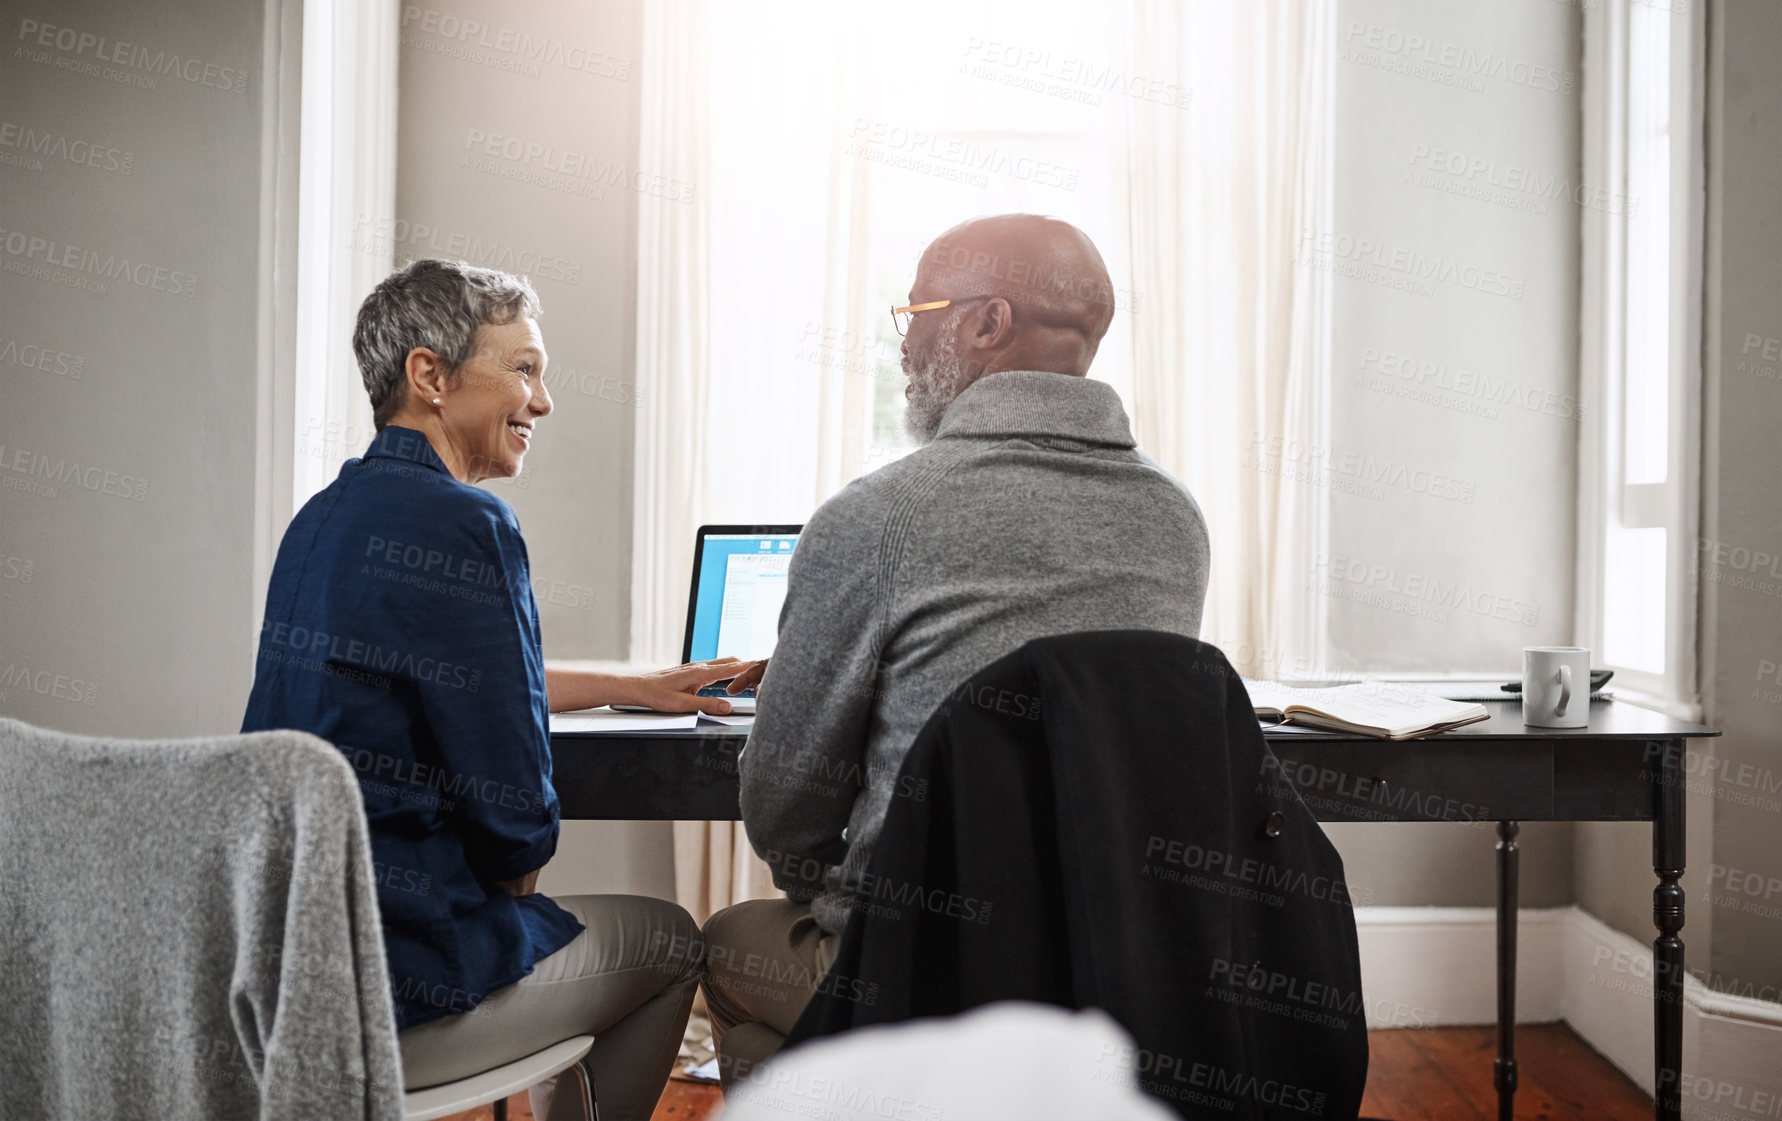 Buy stock photo Shot of a senior couple working on their finances at home